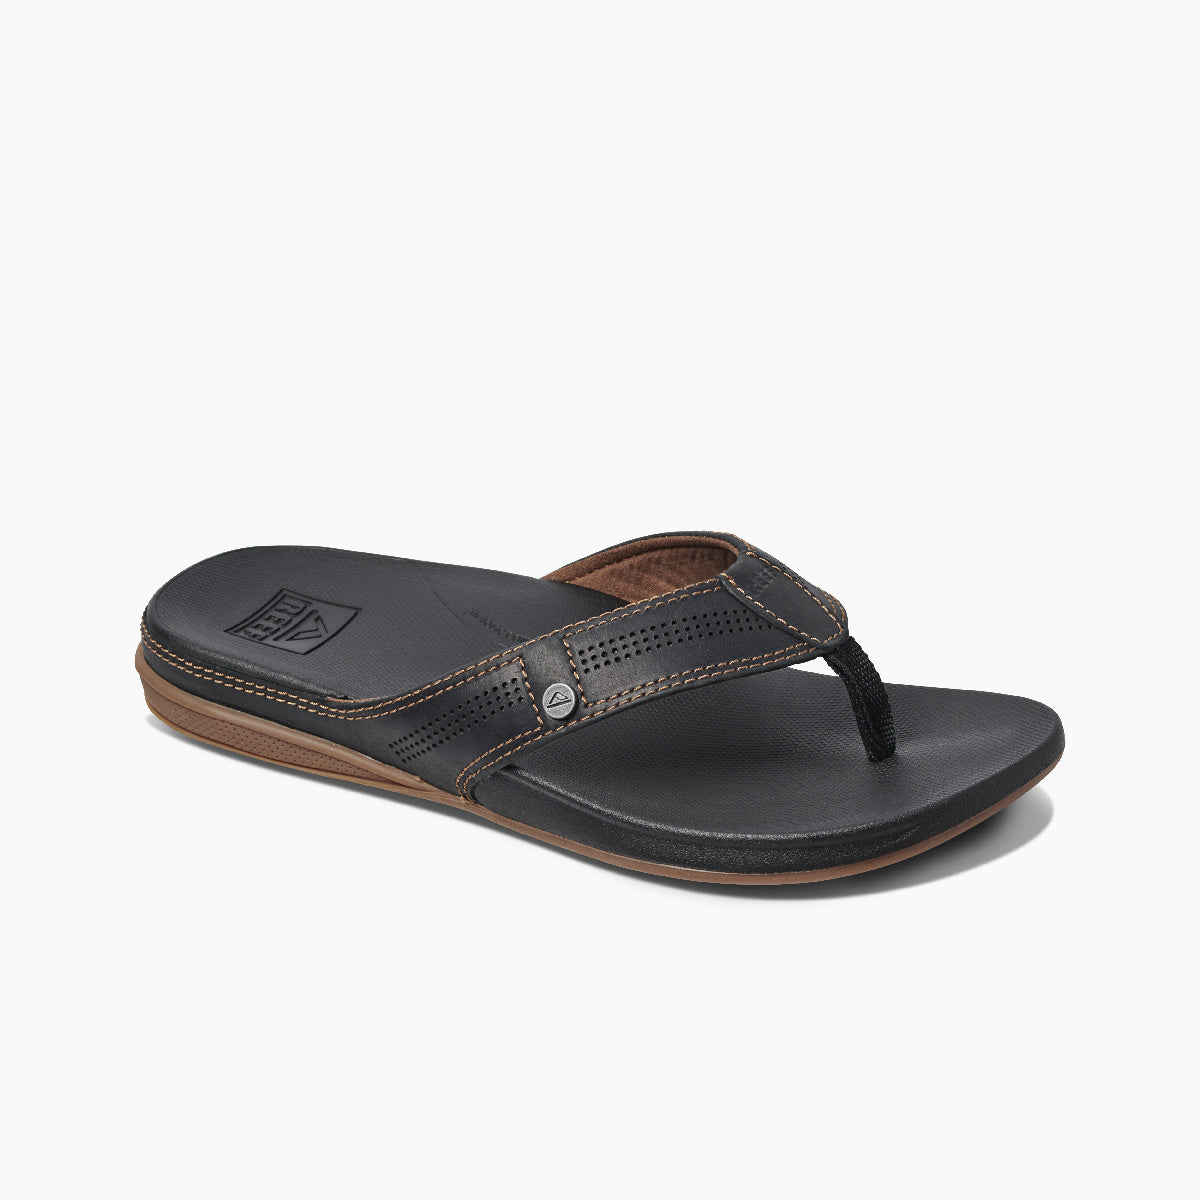 Reef Cushion Bounce Lux Sandals - 88 Gear